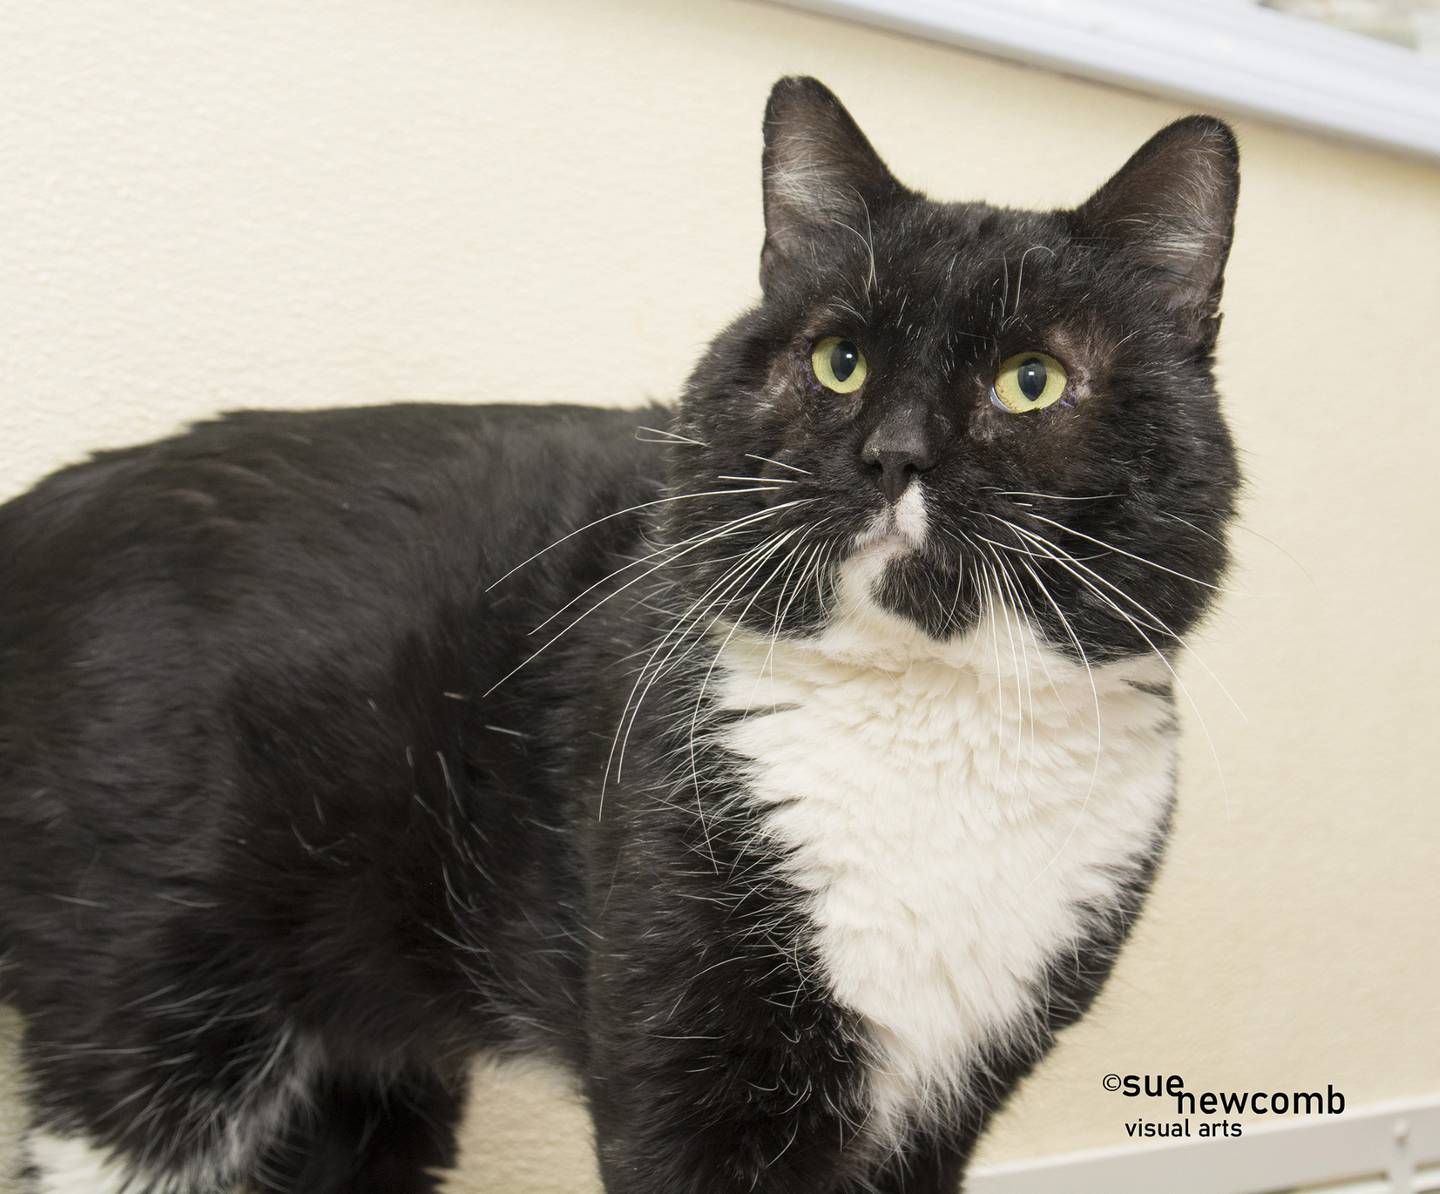 Fozzie Bear is a 7-year-old FIV-positive domestic shorthair that is super chill and loves to lounge. He needs a home without other cats and dogs. Contact the Will County Humane Society at willcountyhumane.com and follow the instructions for the adoption process.